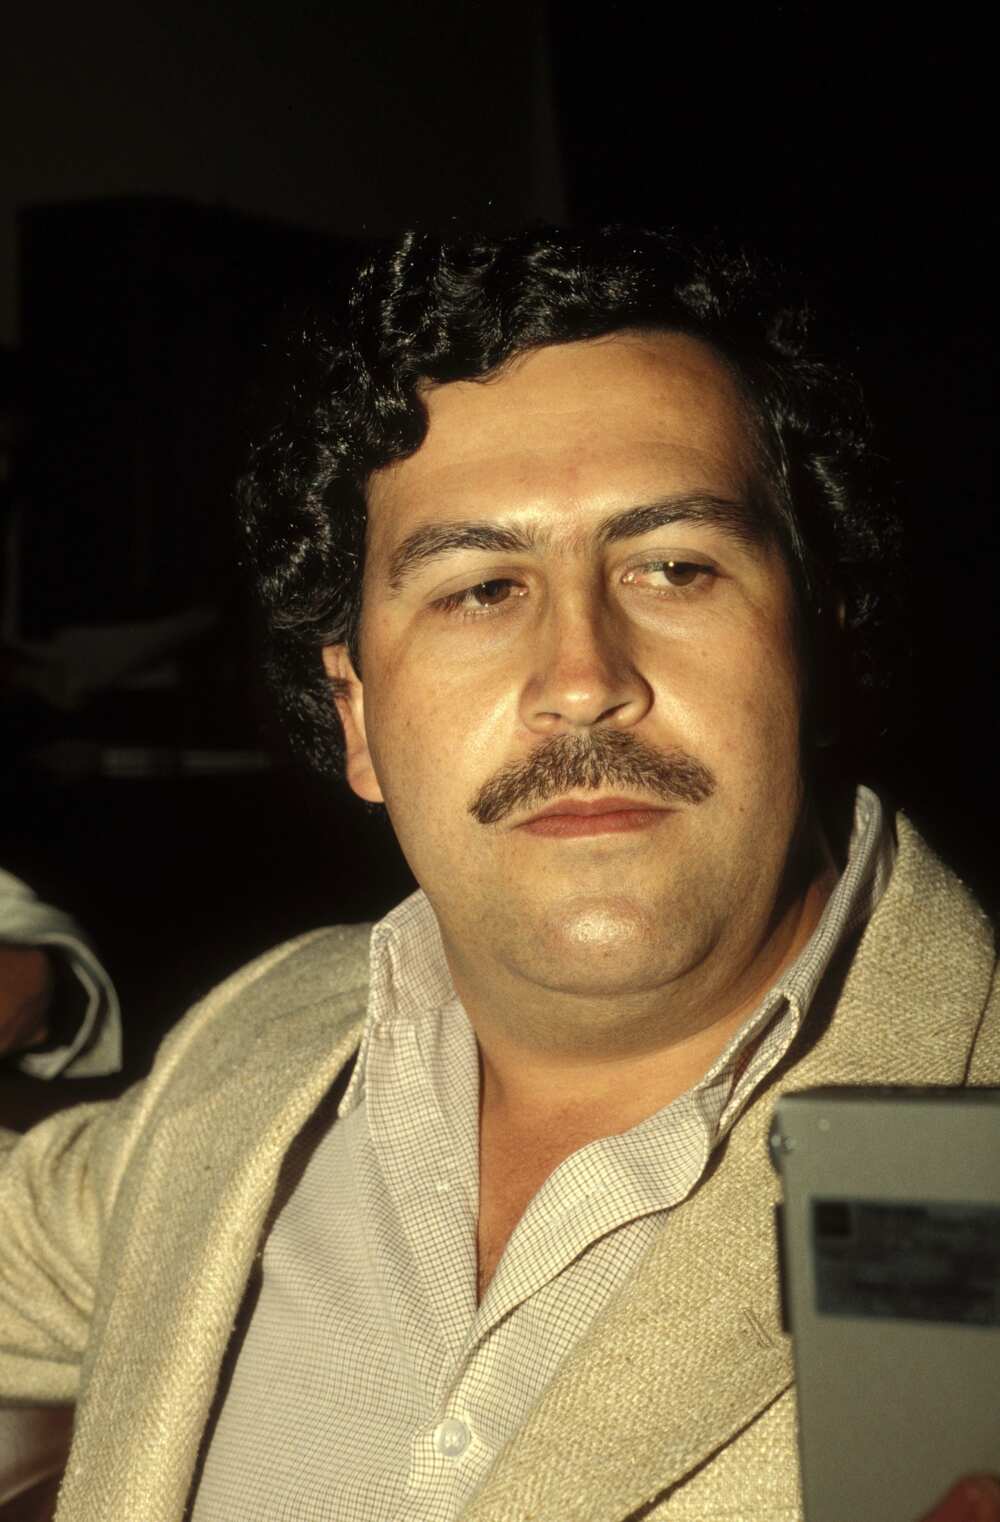 What happened to Pablo Escobar’s wife?